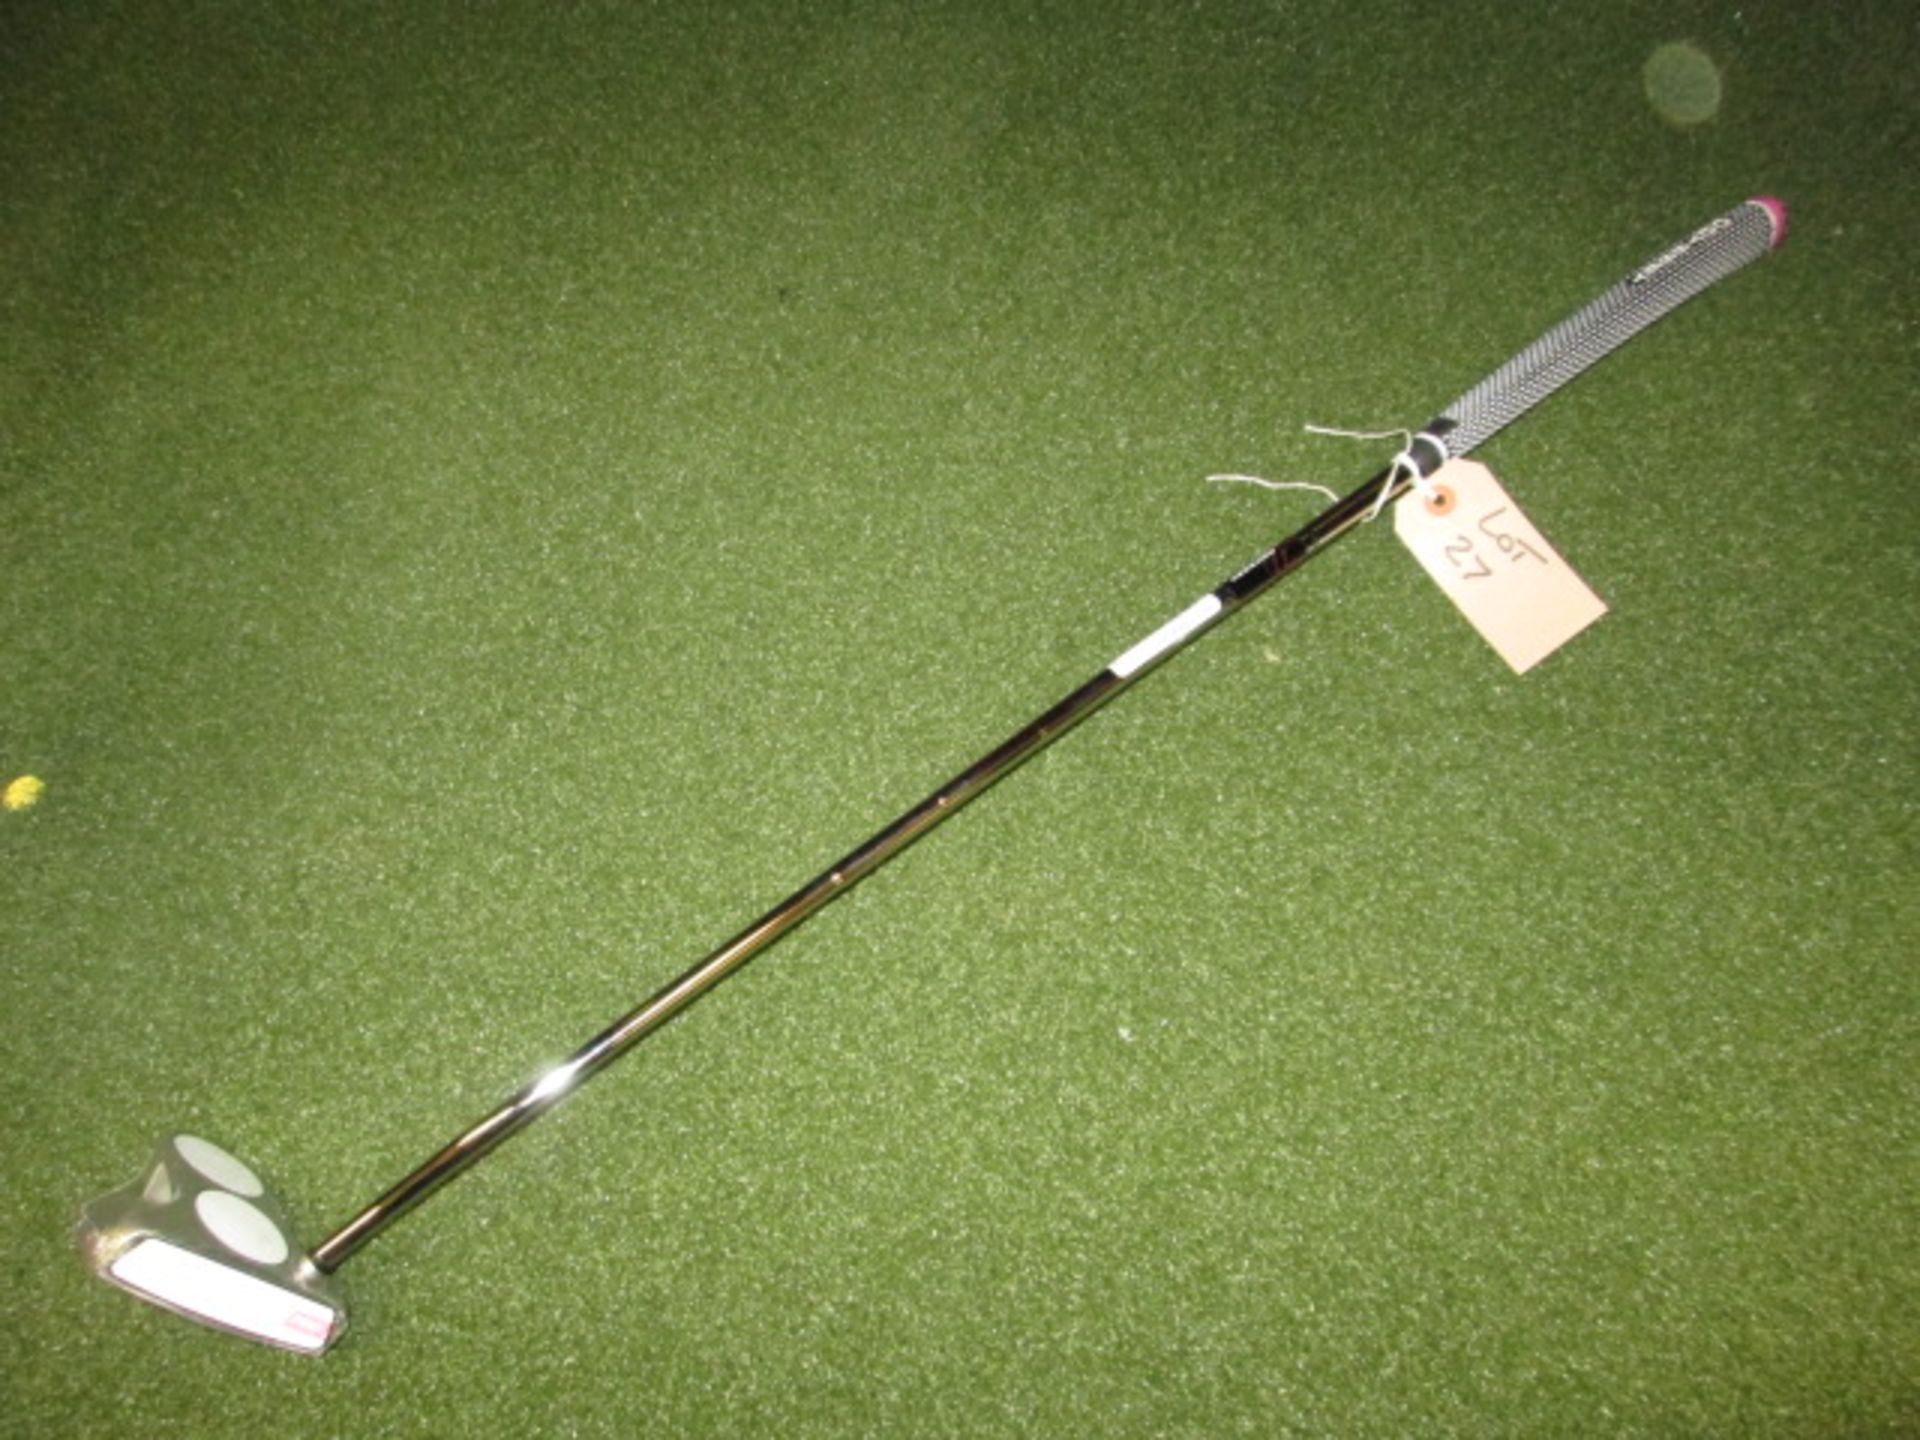 Odyssey Whitehot Pro 2 Ball Putter - 33" (As New) with Headcover - Image 2 of 3